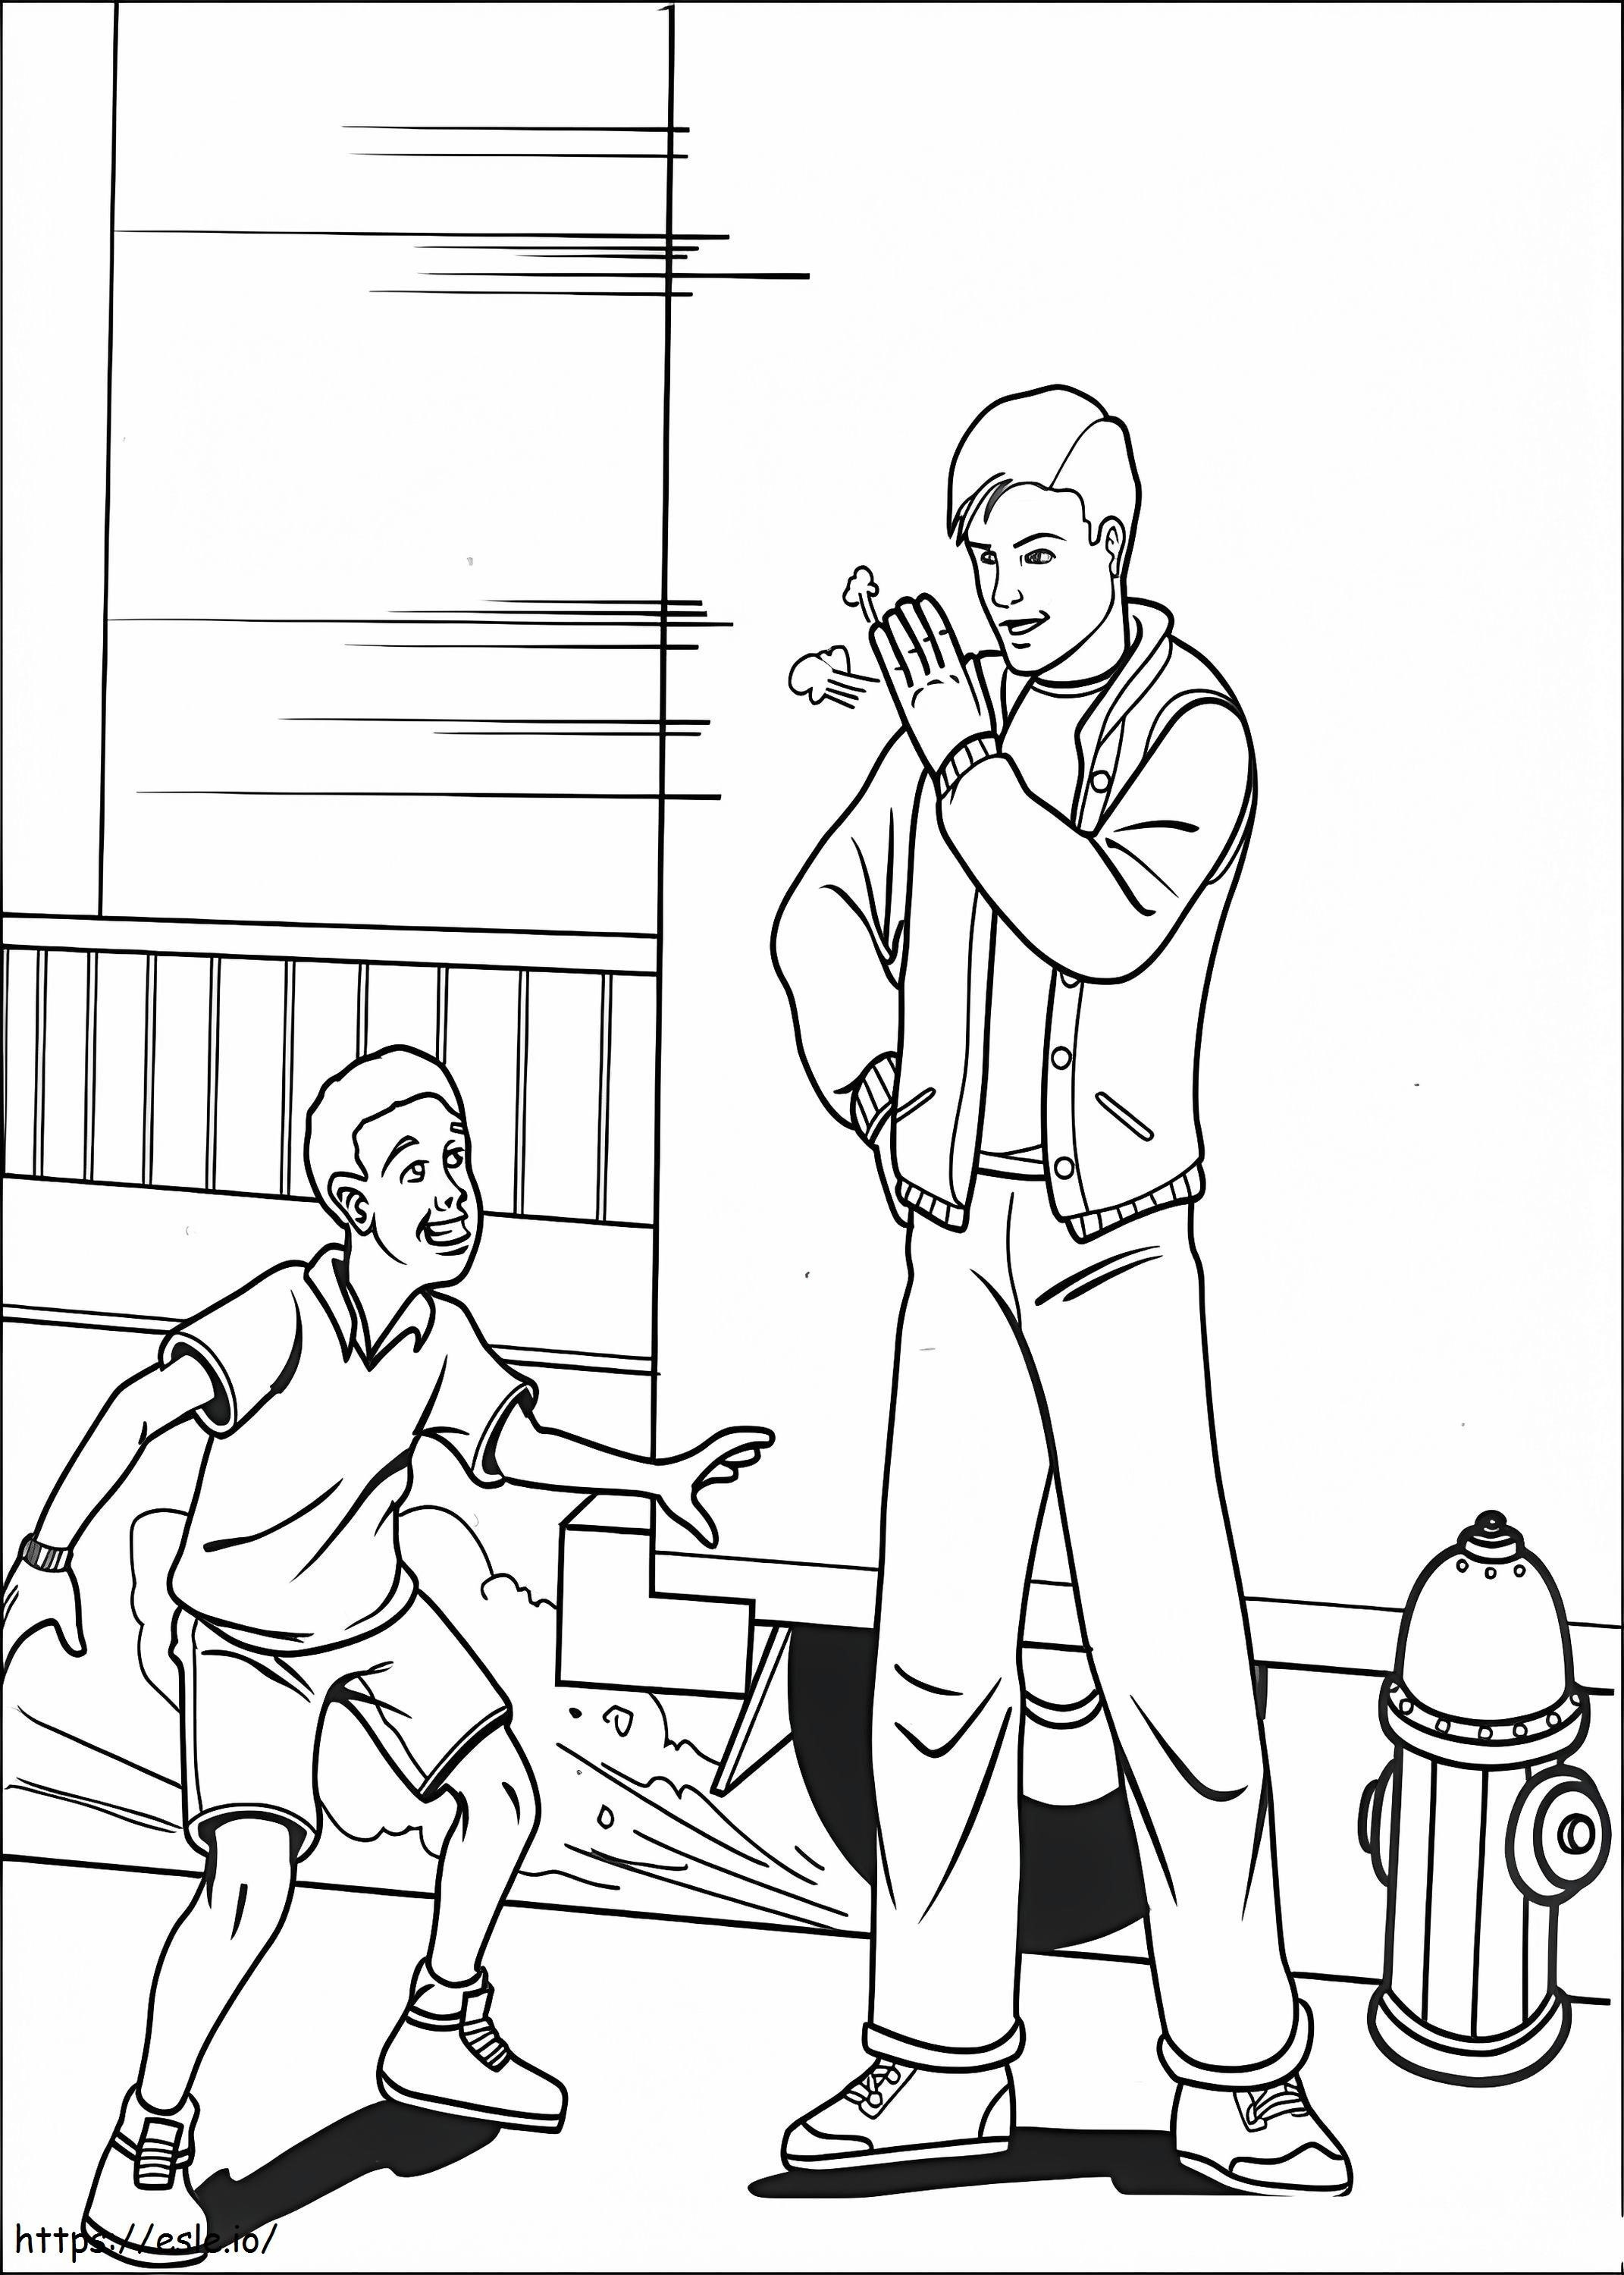 Peter Parker And A Boy coloring page